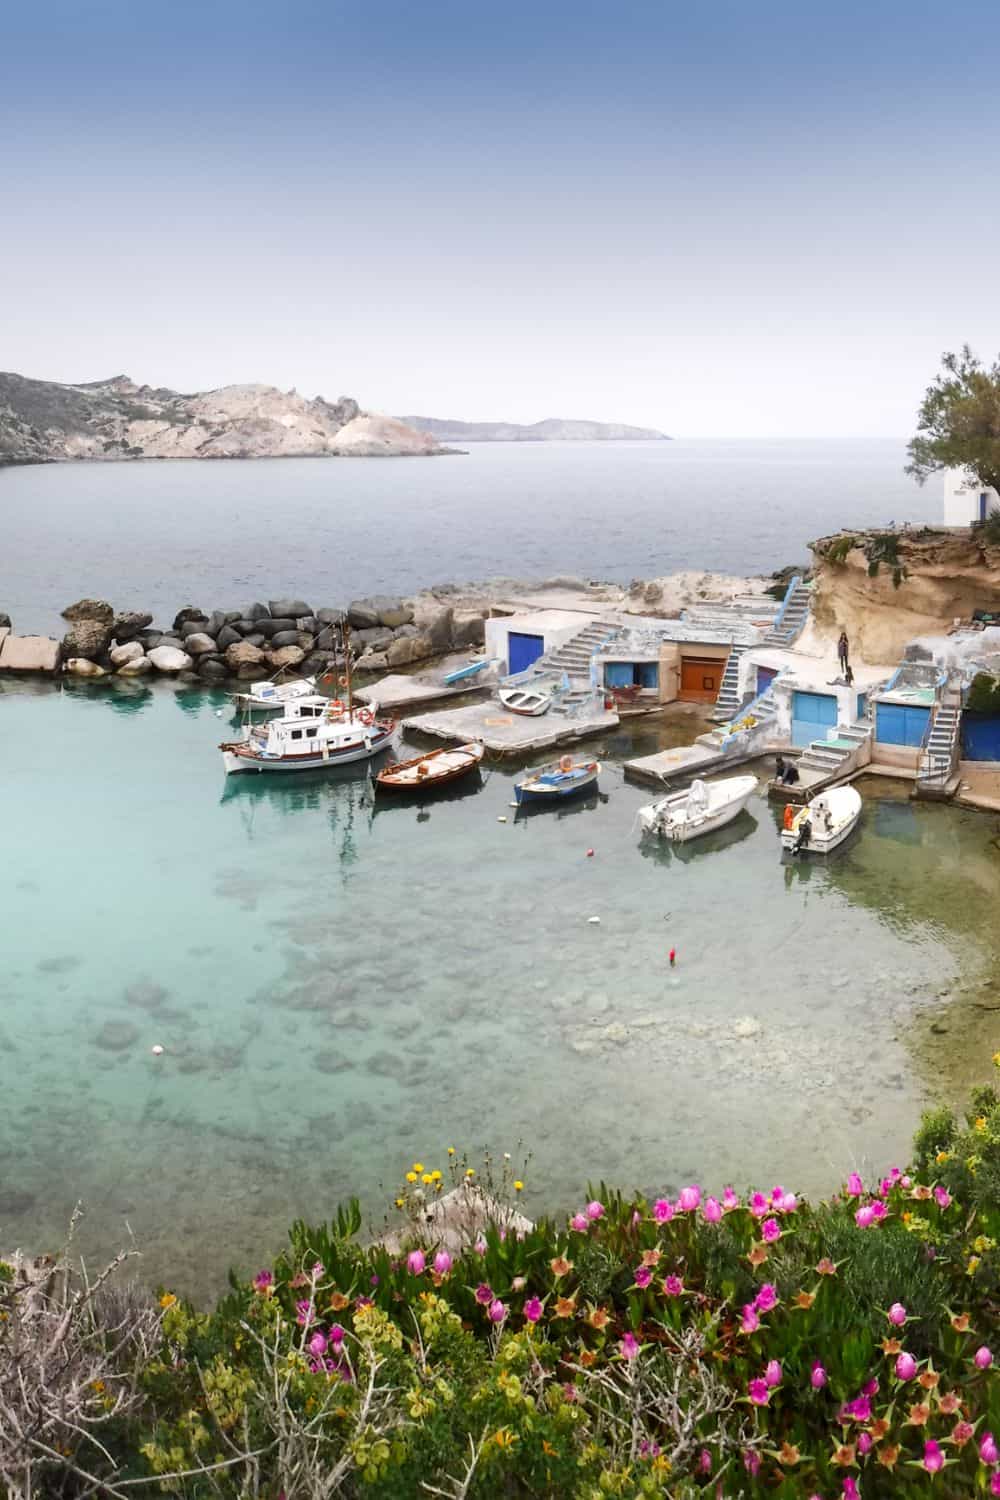 A coastal scene depicting a small harbor with boats docked in clear blue waters. The foreground shows vibrant wildflowers, adding a touch of color to the serene setting.